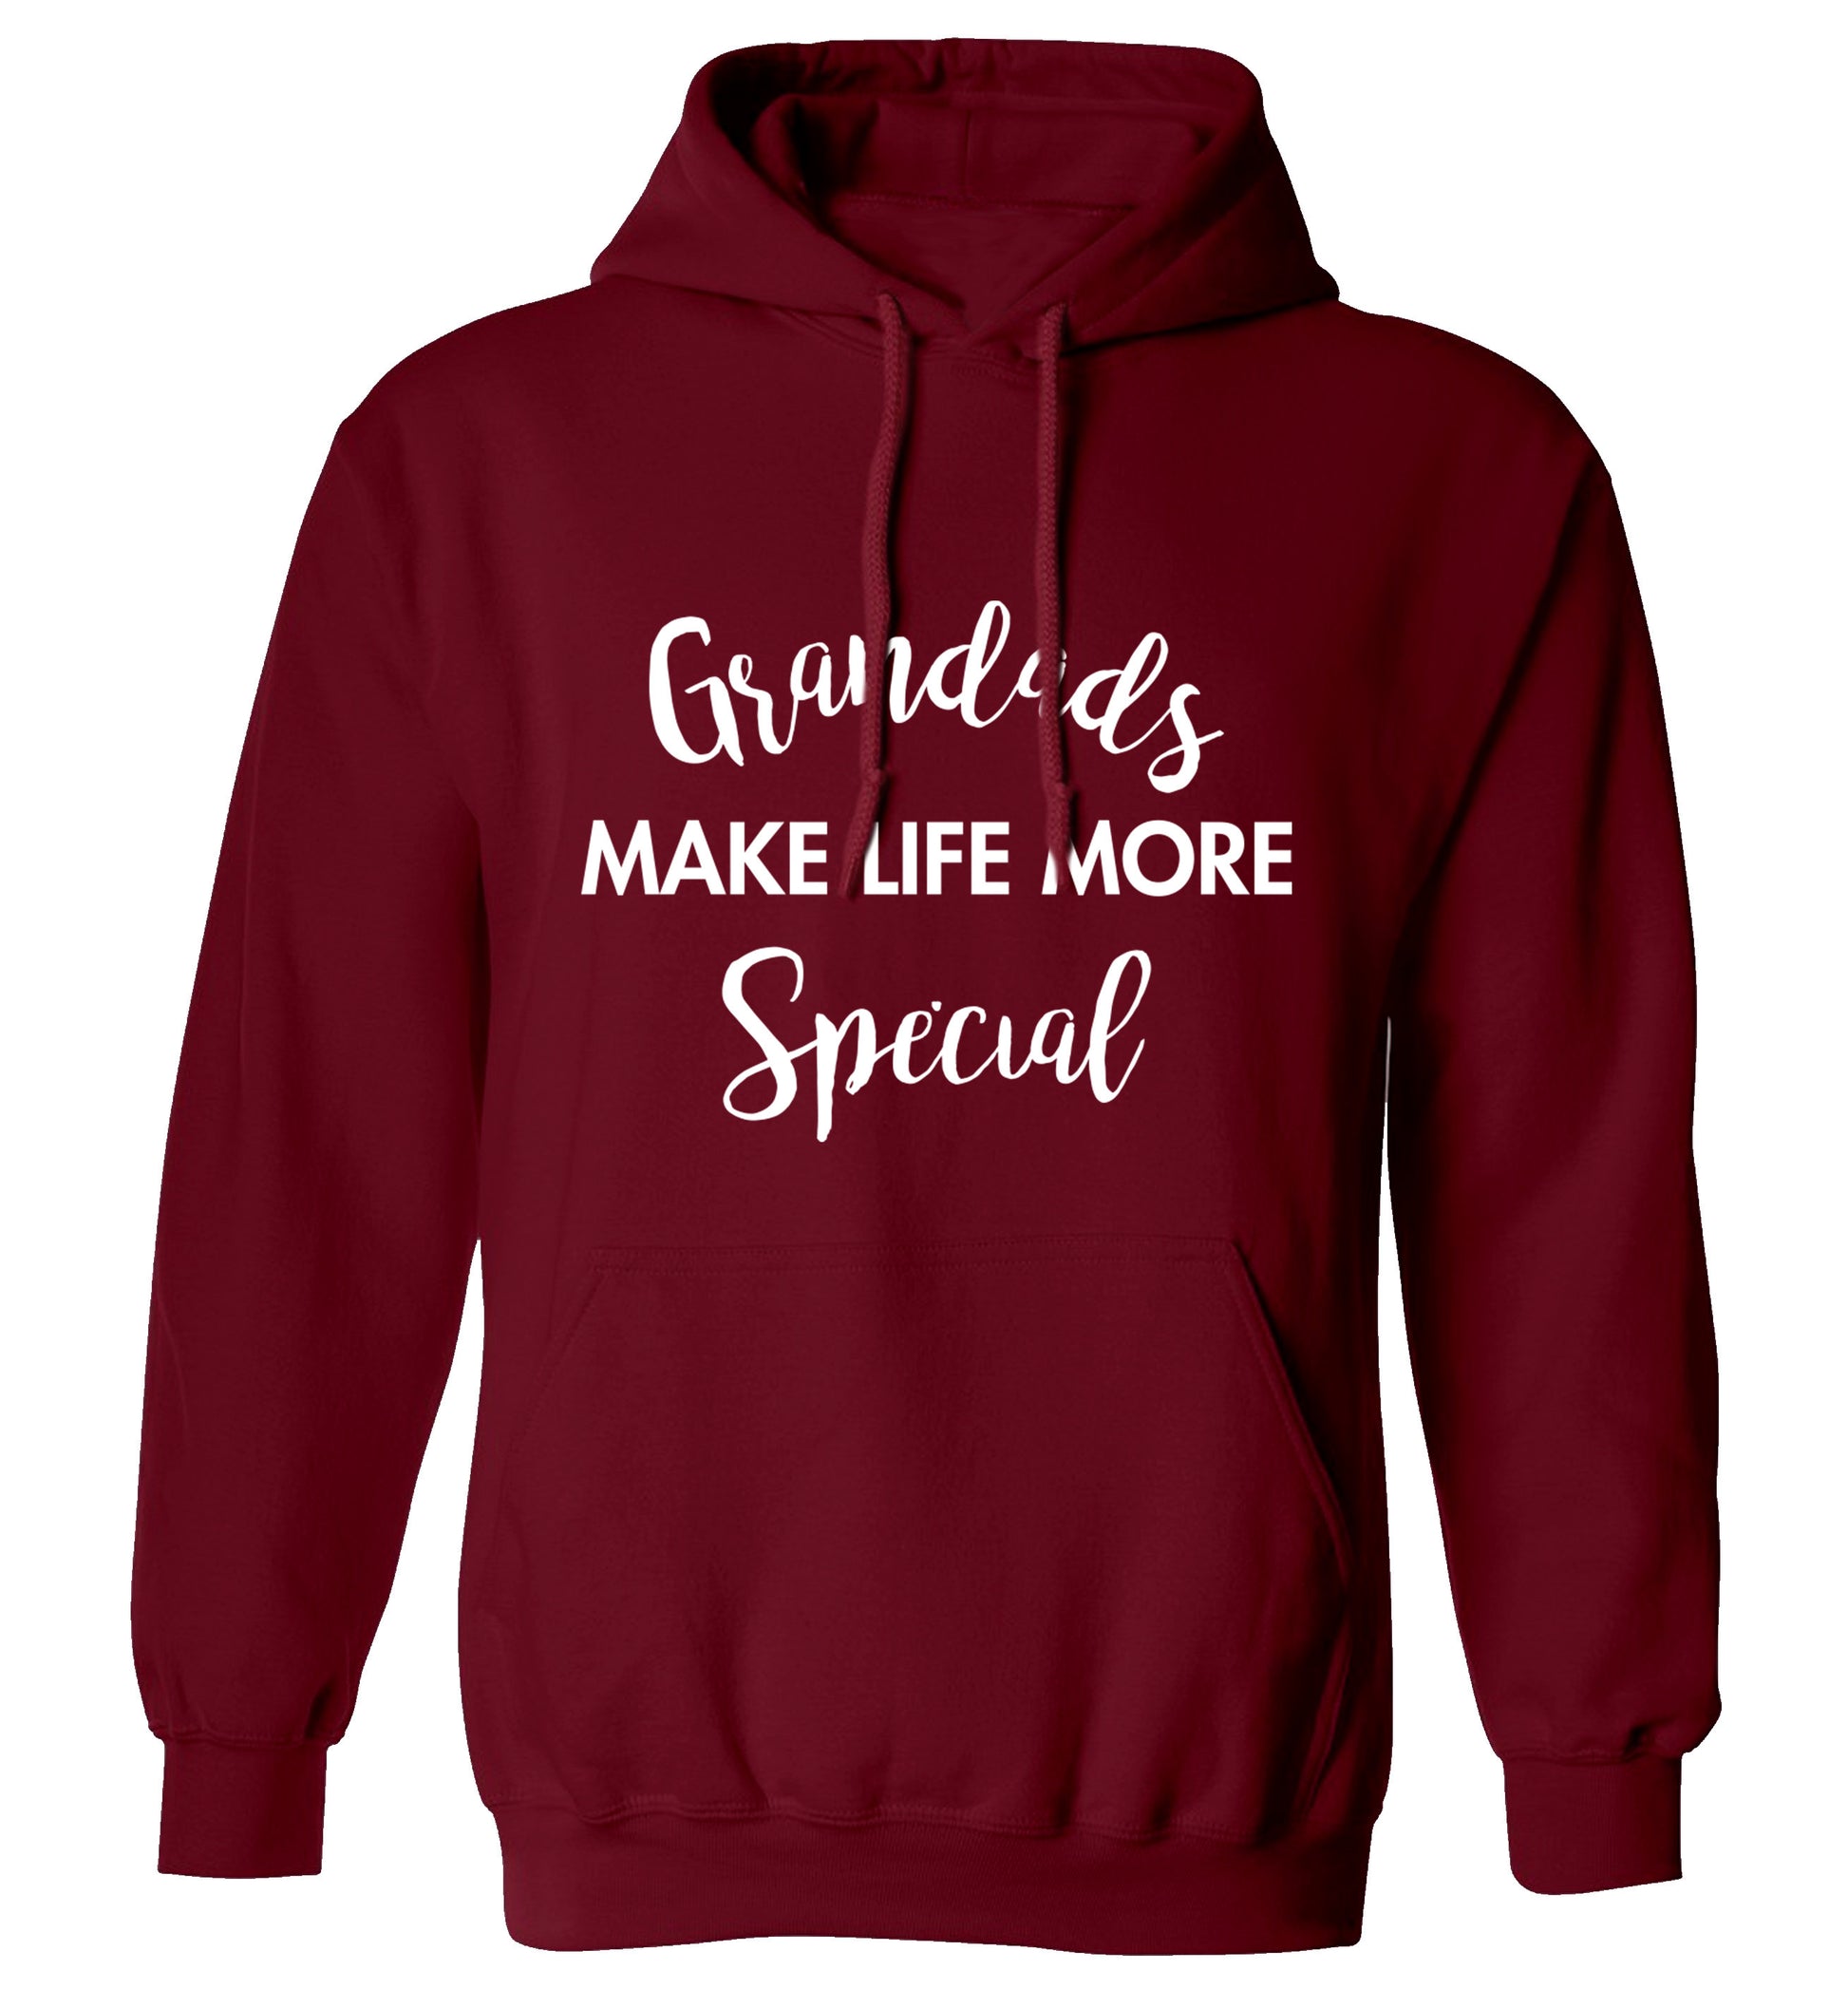 Grandads make life more special adults unisex maroon hoodie 2XL